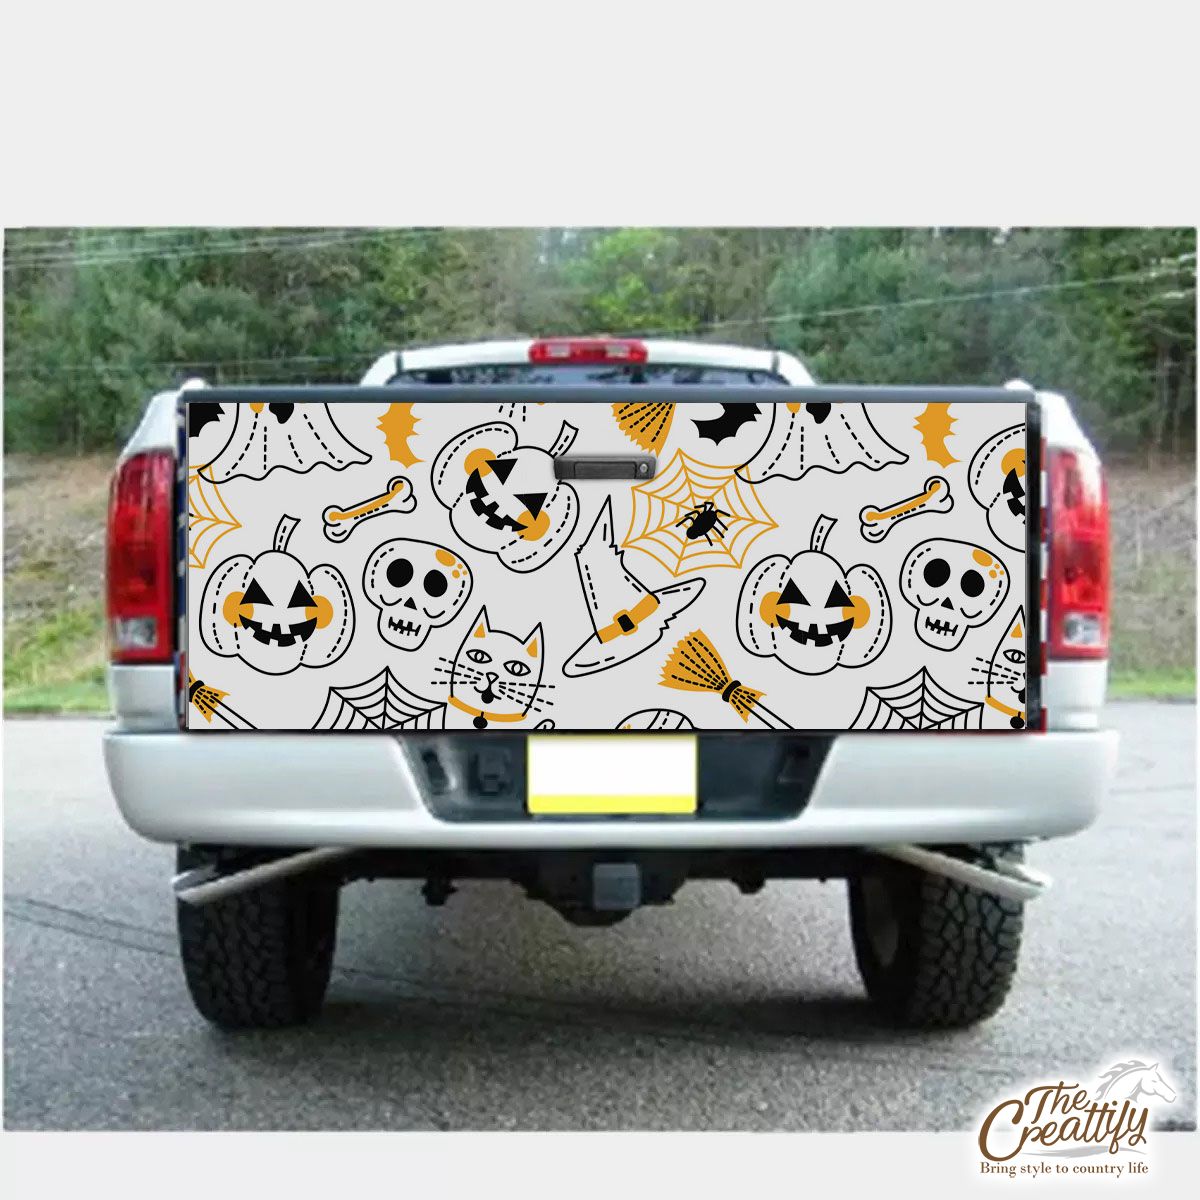 Cute Halloween Pumpkin Face, Jack O Lantern, Halloween Skeleton, Wicked Witches, Black Cat Truck Bed Decal